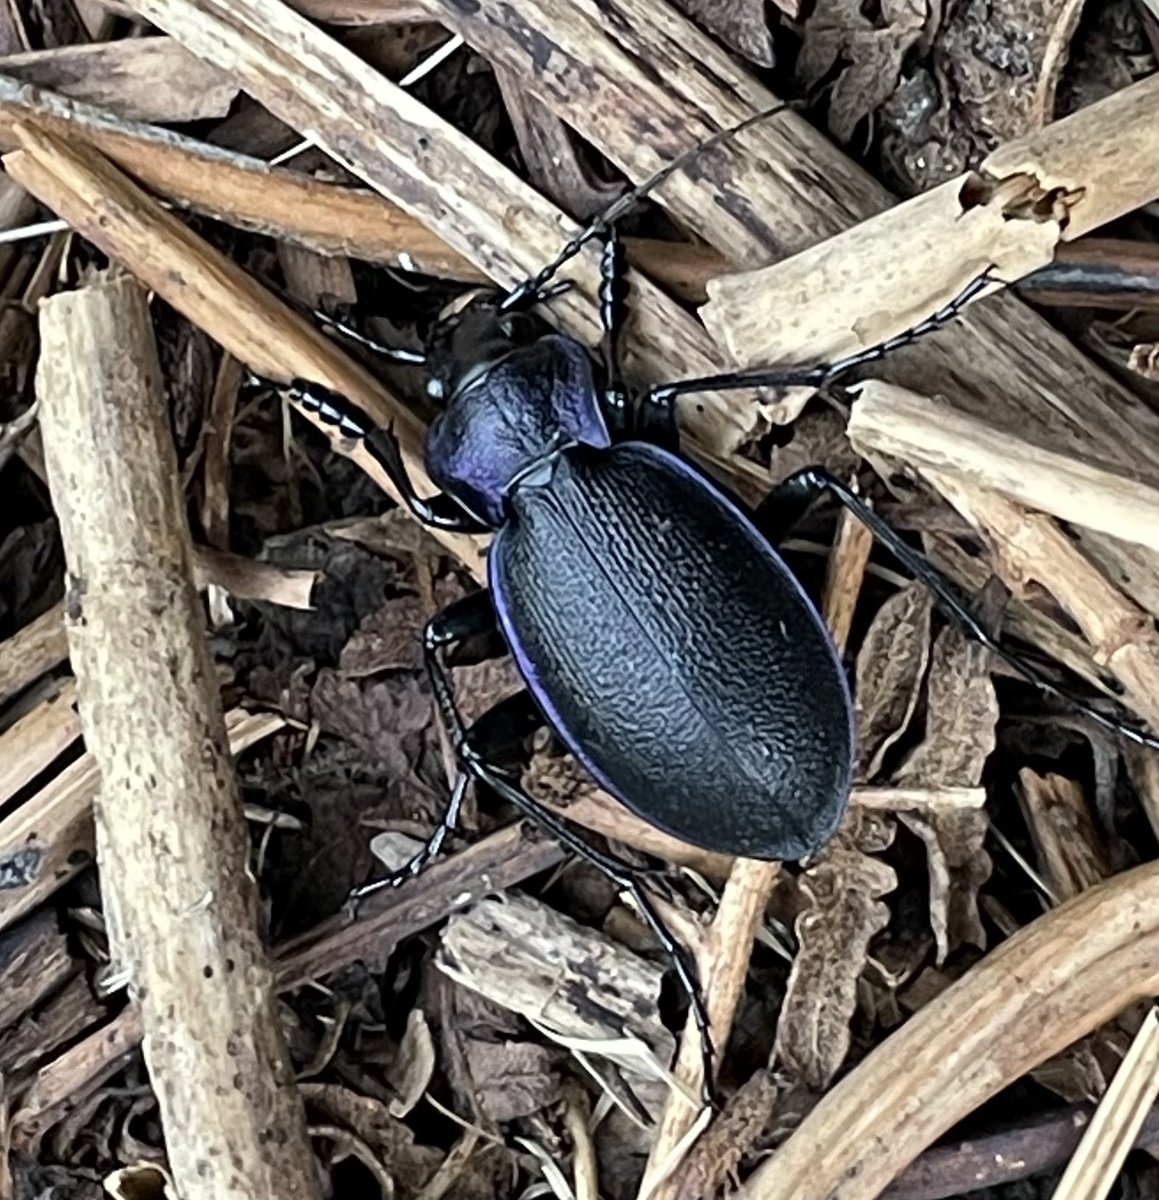 We are loving #Autumnwatch 🧡 especially the Goshawk …what a bird! We are really enjoying learning about all things small from @Lucy_Lapwing We had a violet ground beetle visit our shop this week.. absolutely stunning 😍